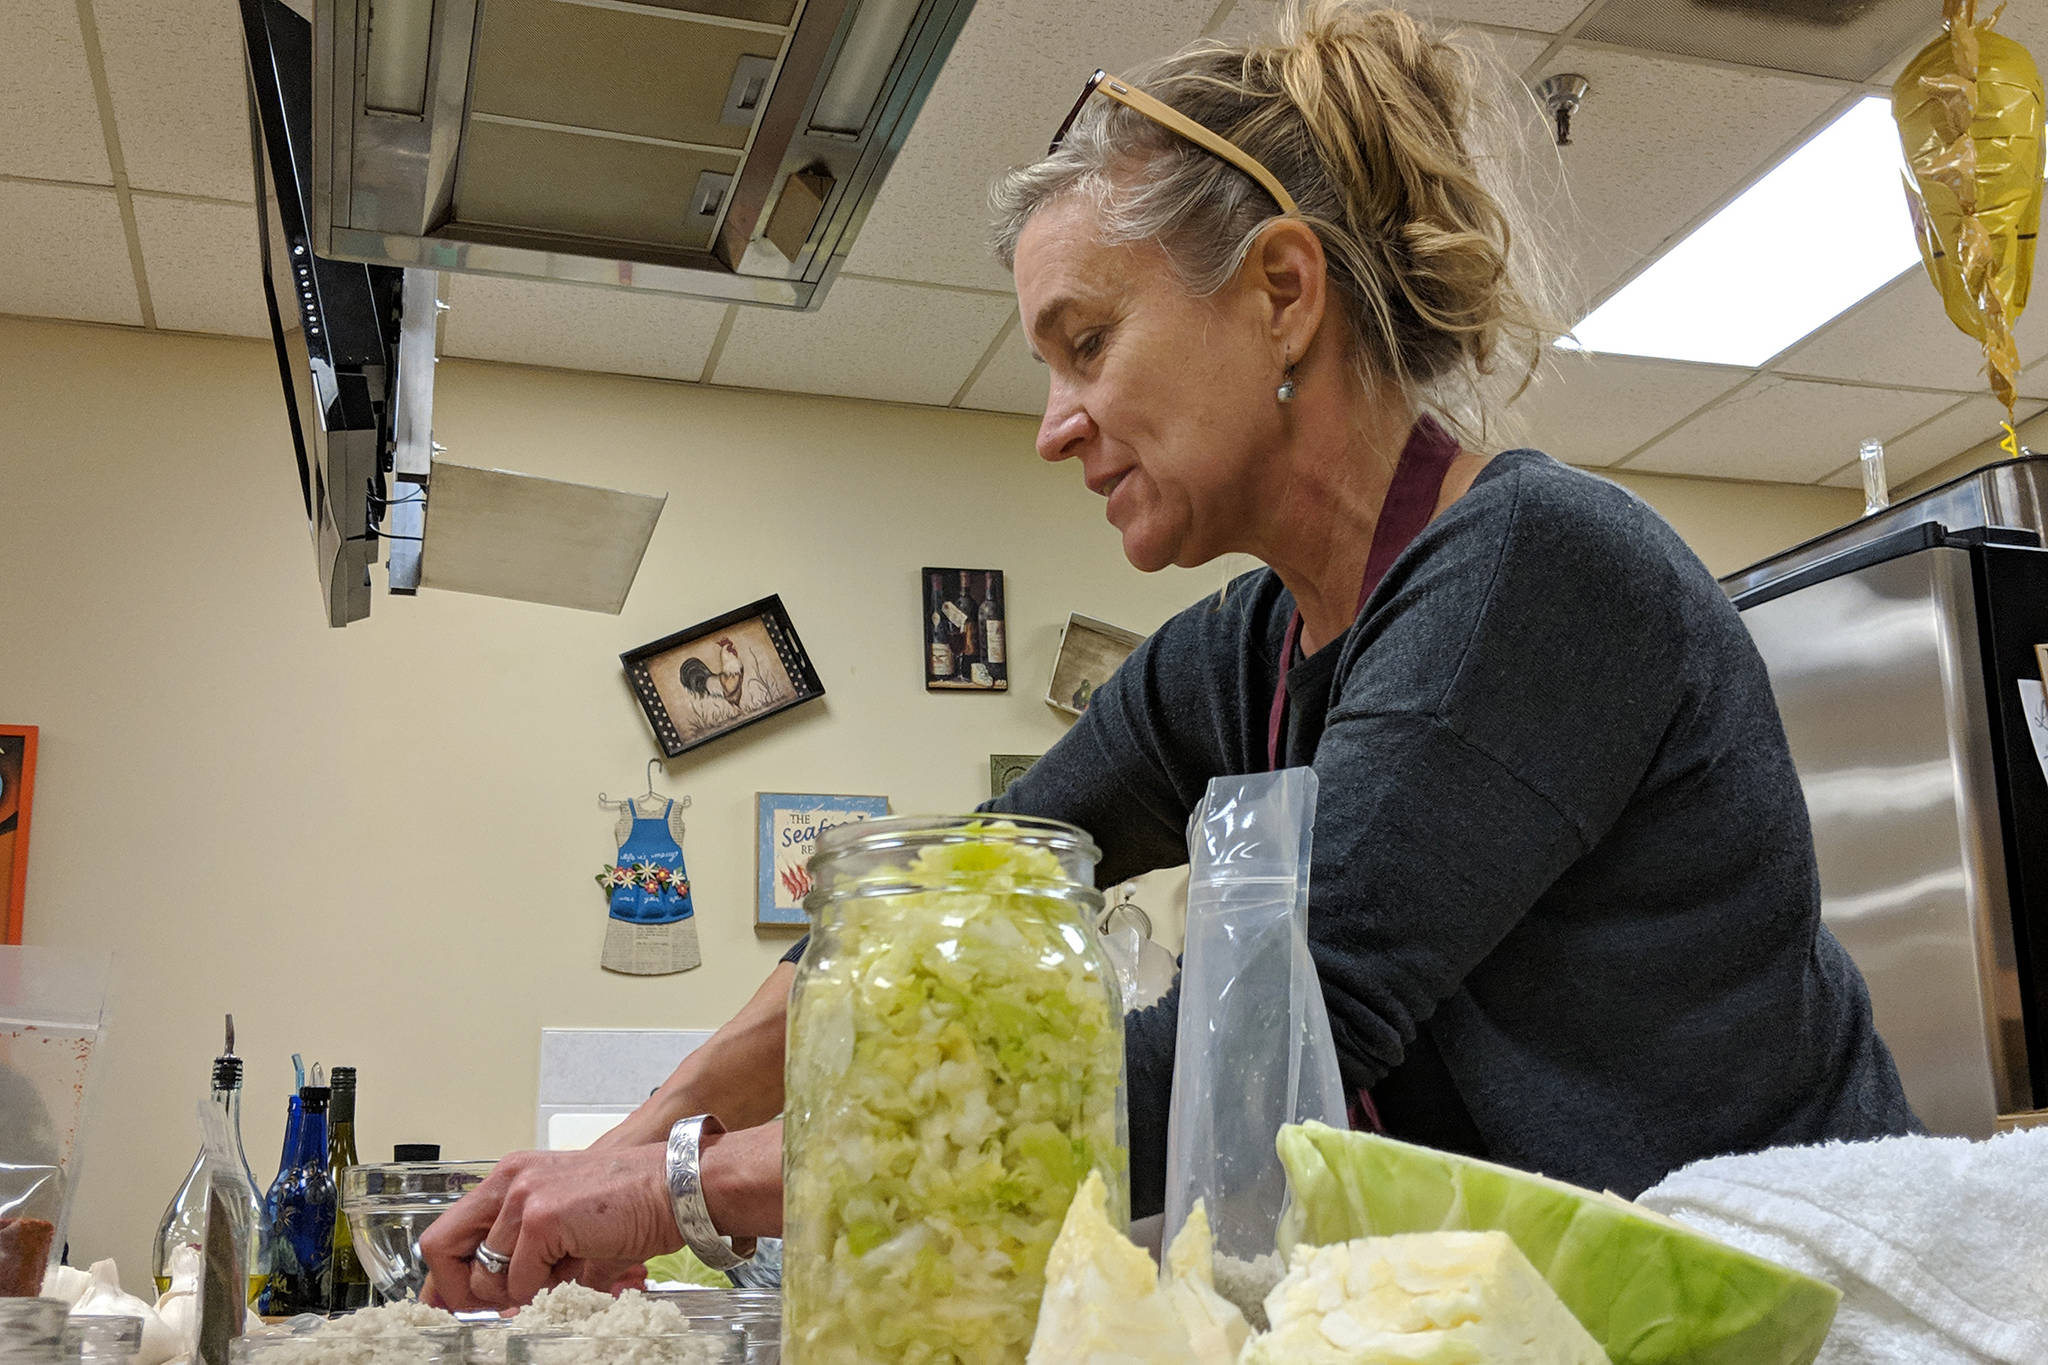 Julie O’Brien, a former Juneauite, UAS alumna and owner of Firefly Kitchens, prepares ingredients ahead of Fermentation 101 Friday, Nov. 9, at Chez Alaska Cooking School. The workshop detailed the purported health benefits of fermented foods and taught attendees how to make their own at home. (Ben Hohenstatt | Capital City Weekly)